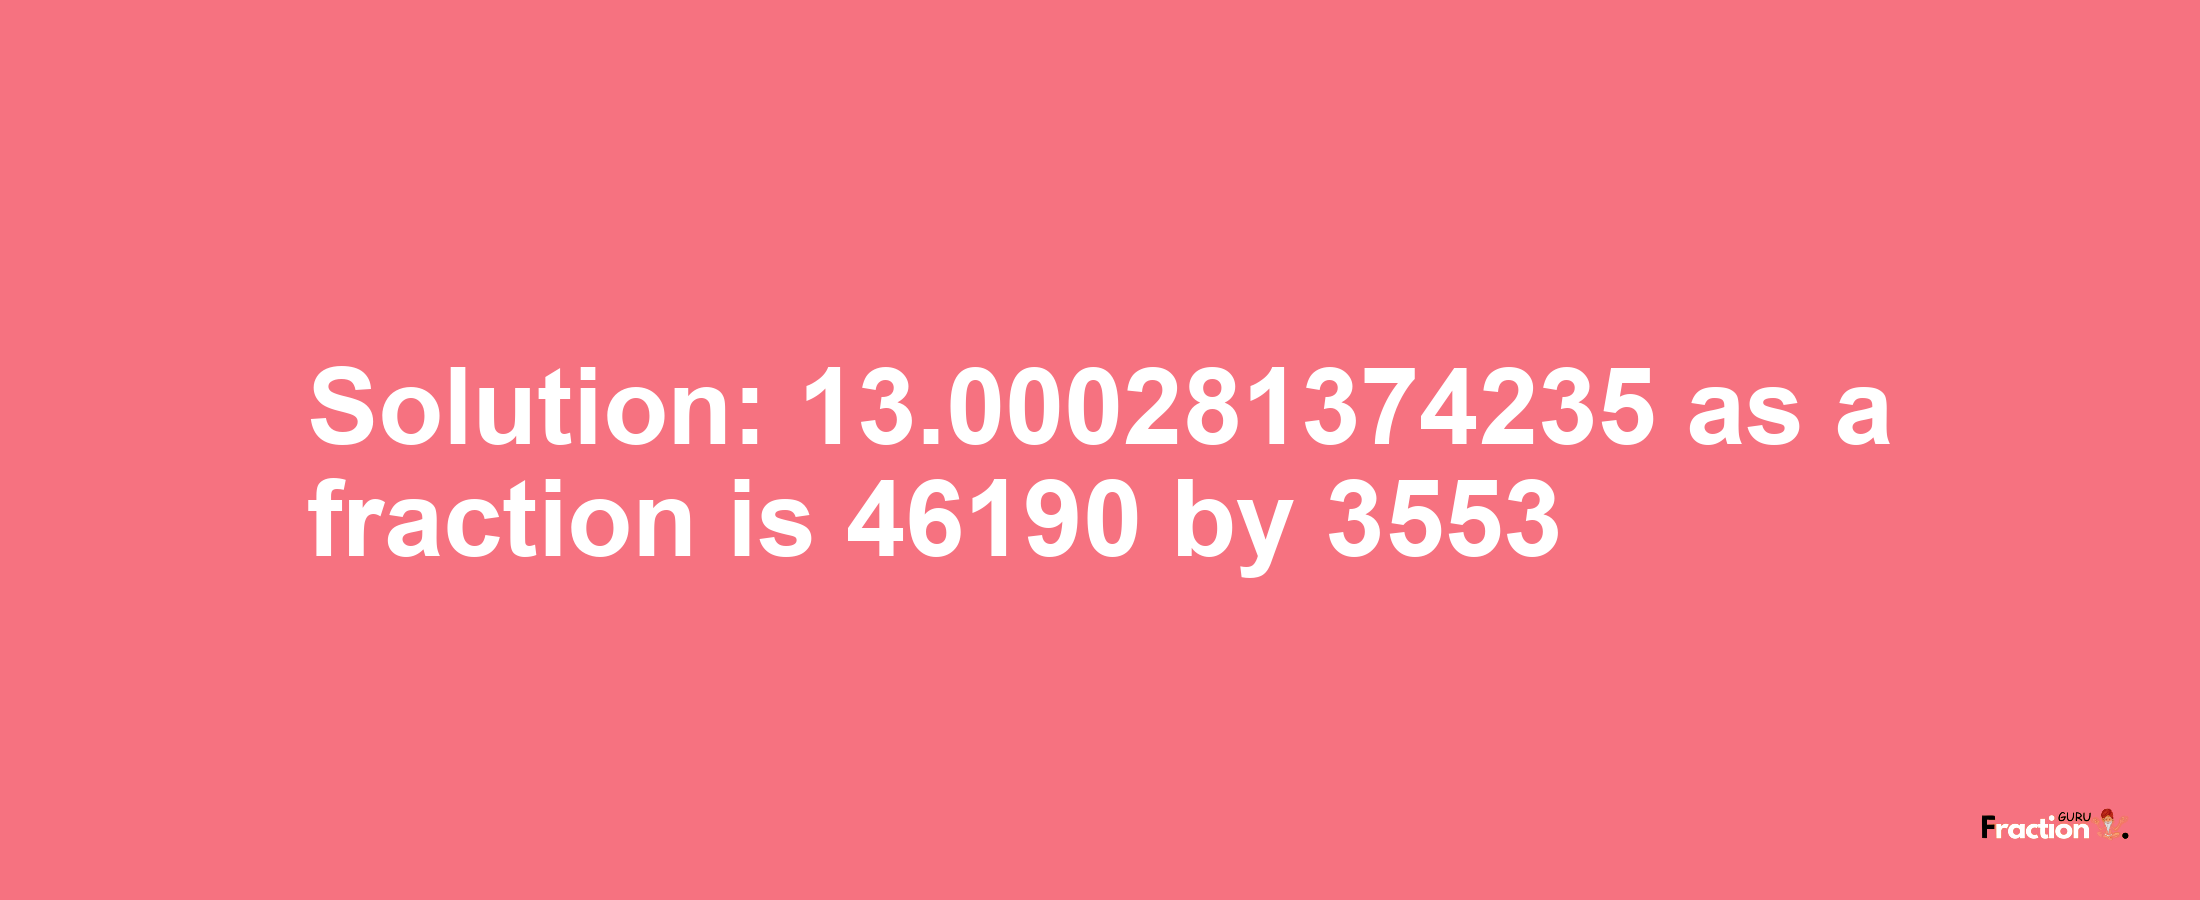 Solution:13.000281374235 as a fraction is 46190/3553